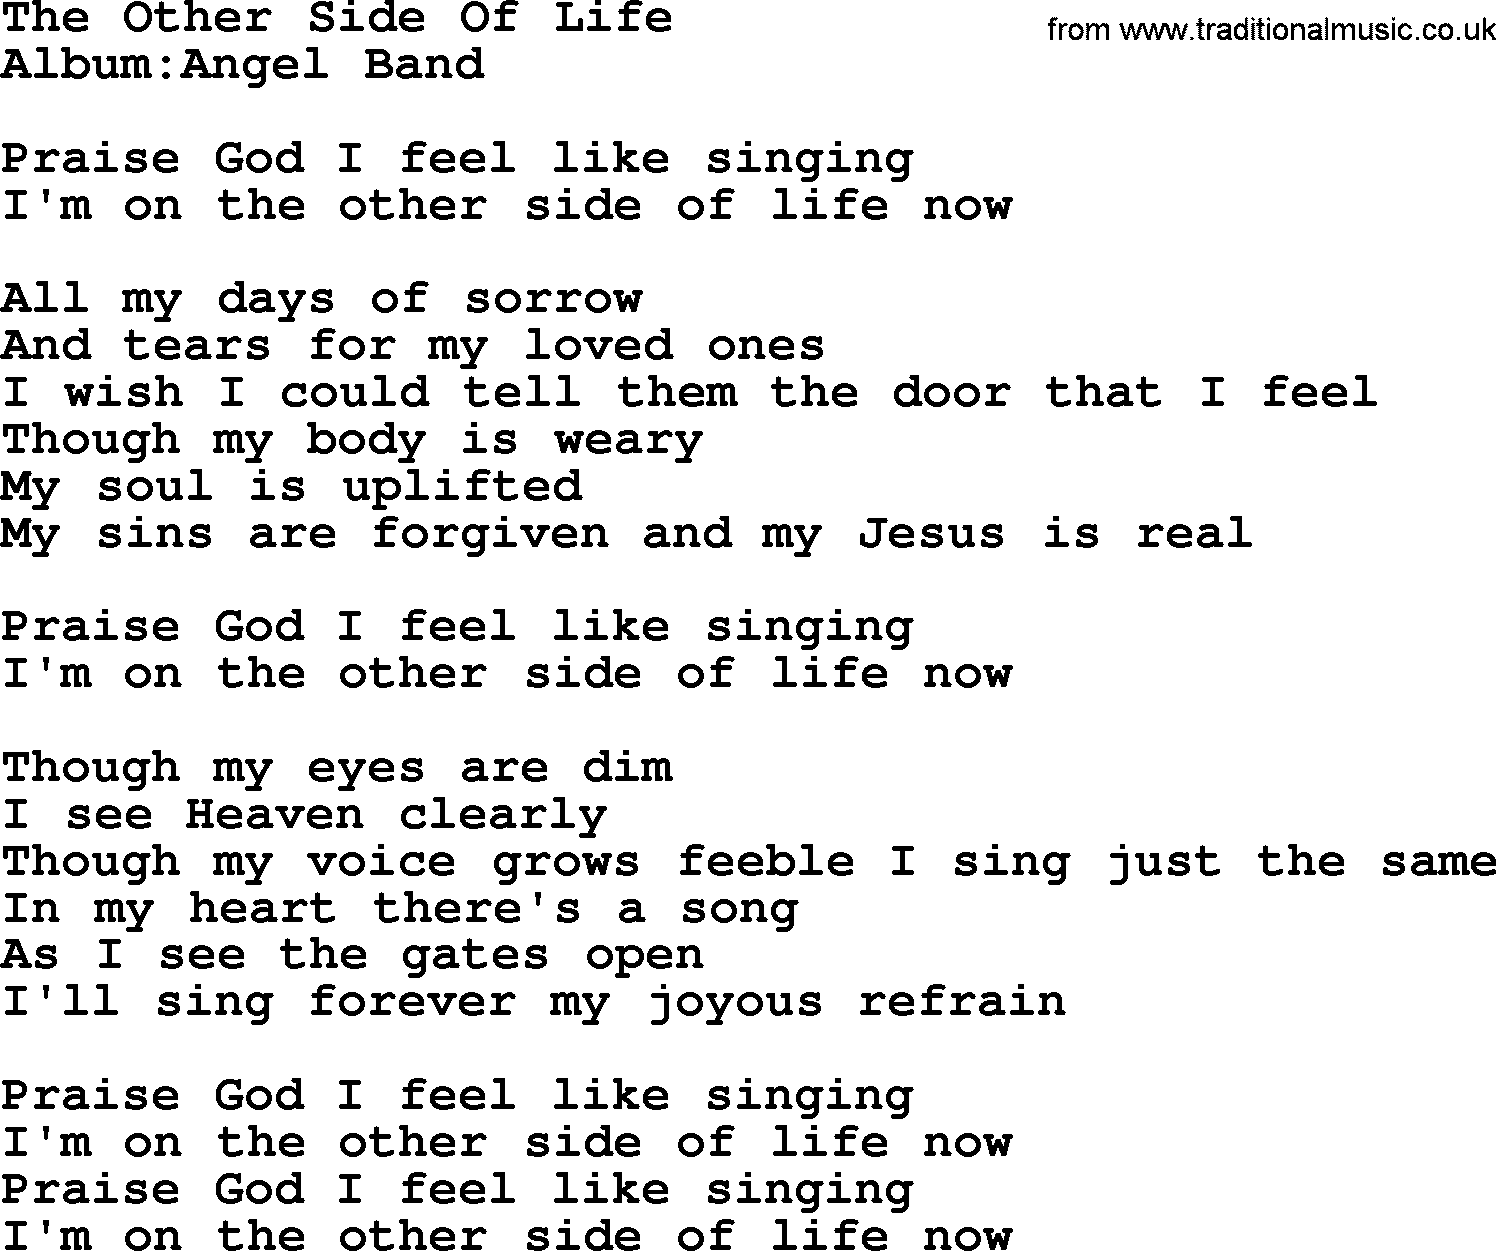 Emmylou Harris song: The Other Side Of Life lyrics